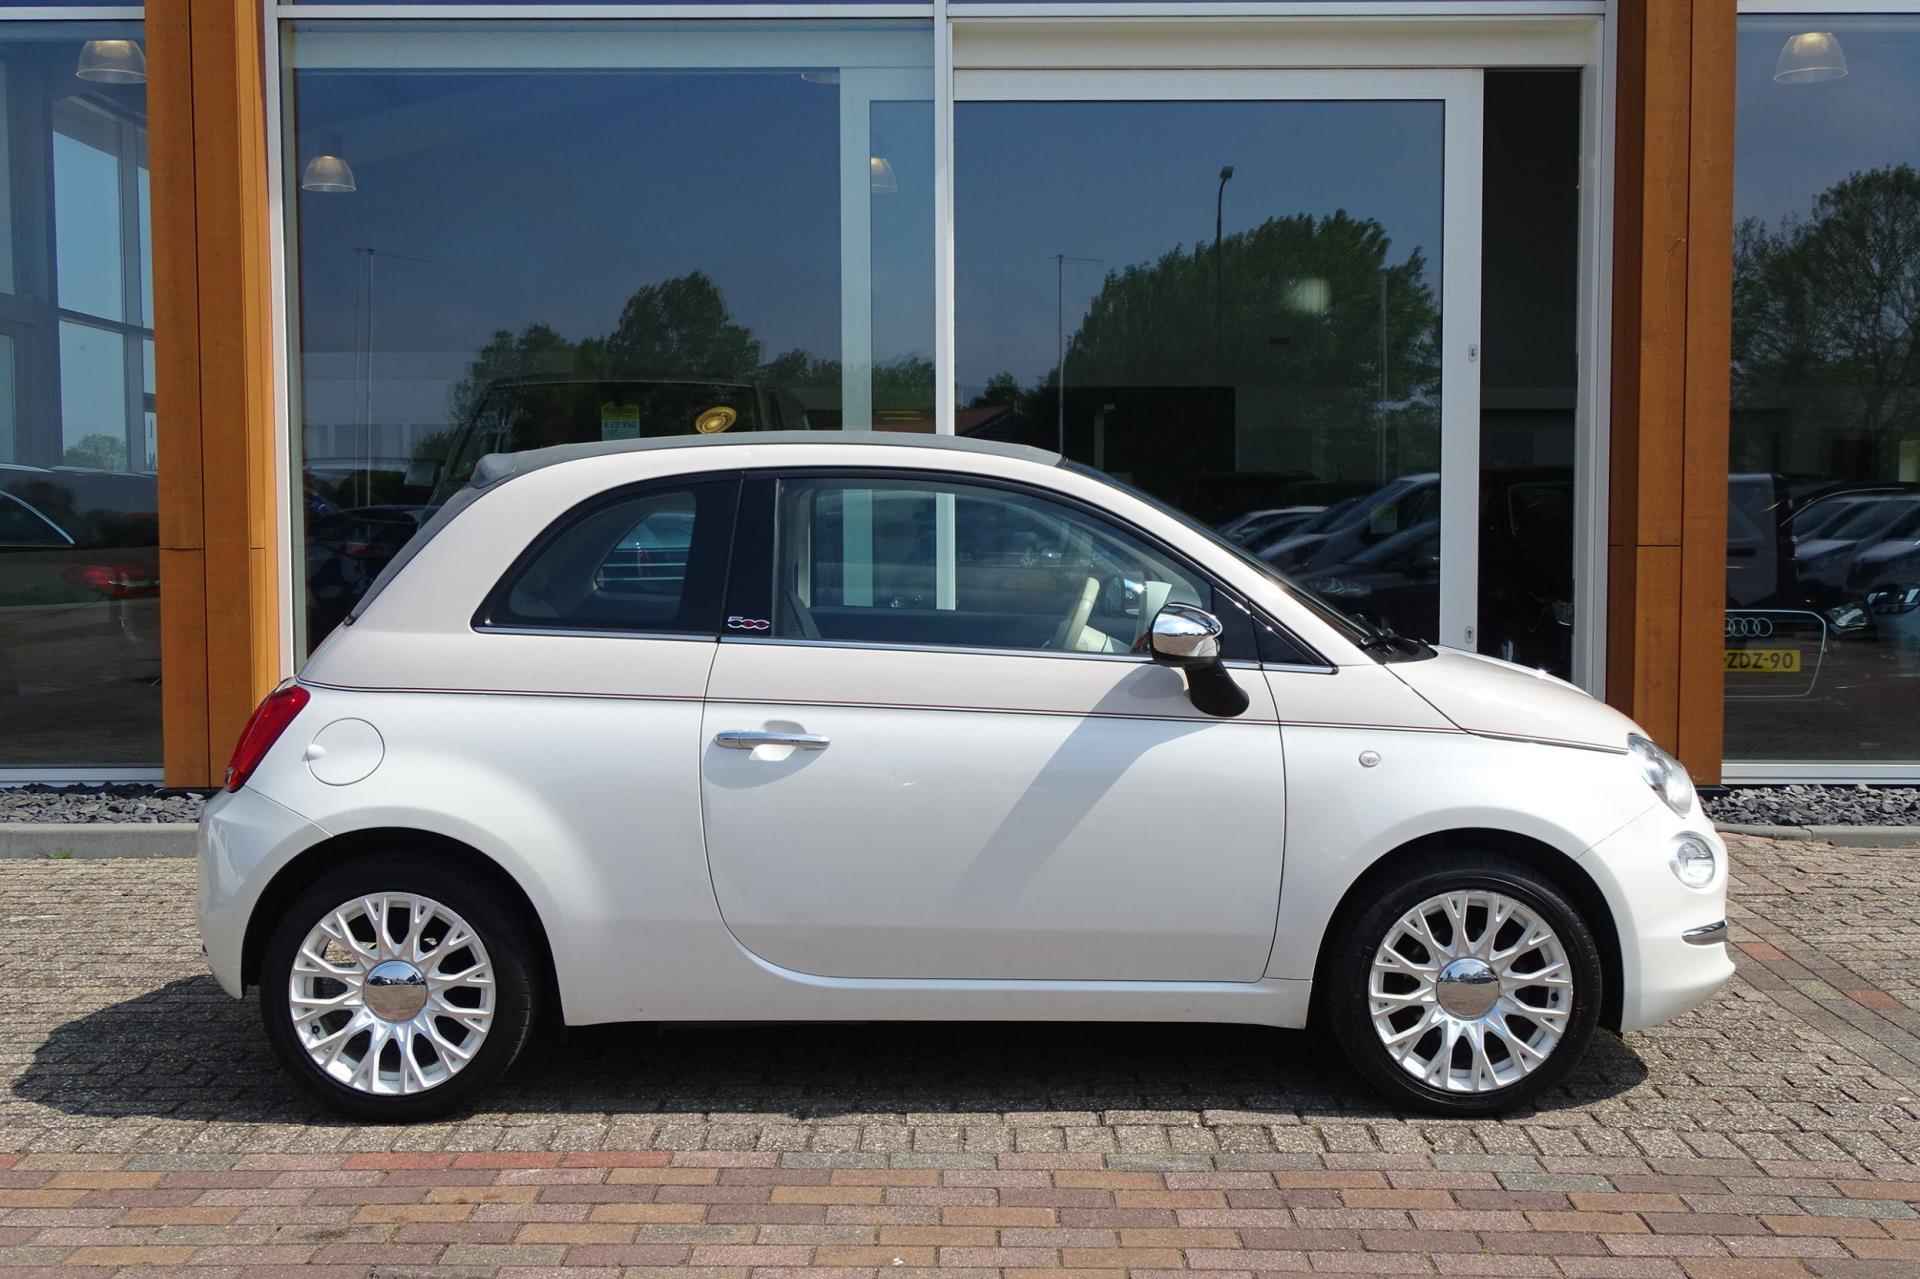 Fiat 500 C 0.9 TwinAir Turbo Forever Young - 6/41